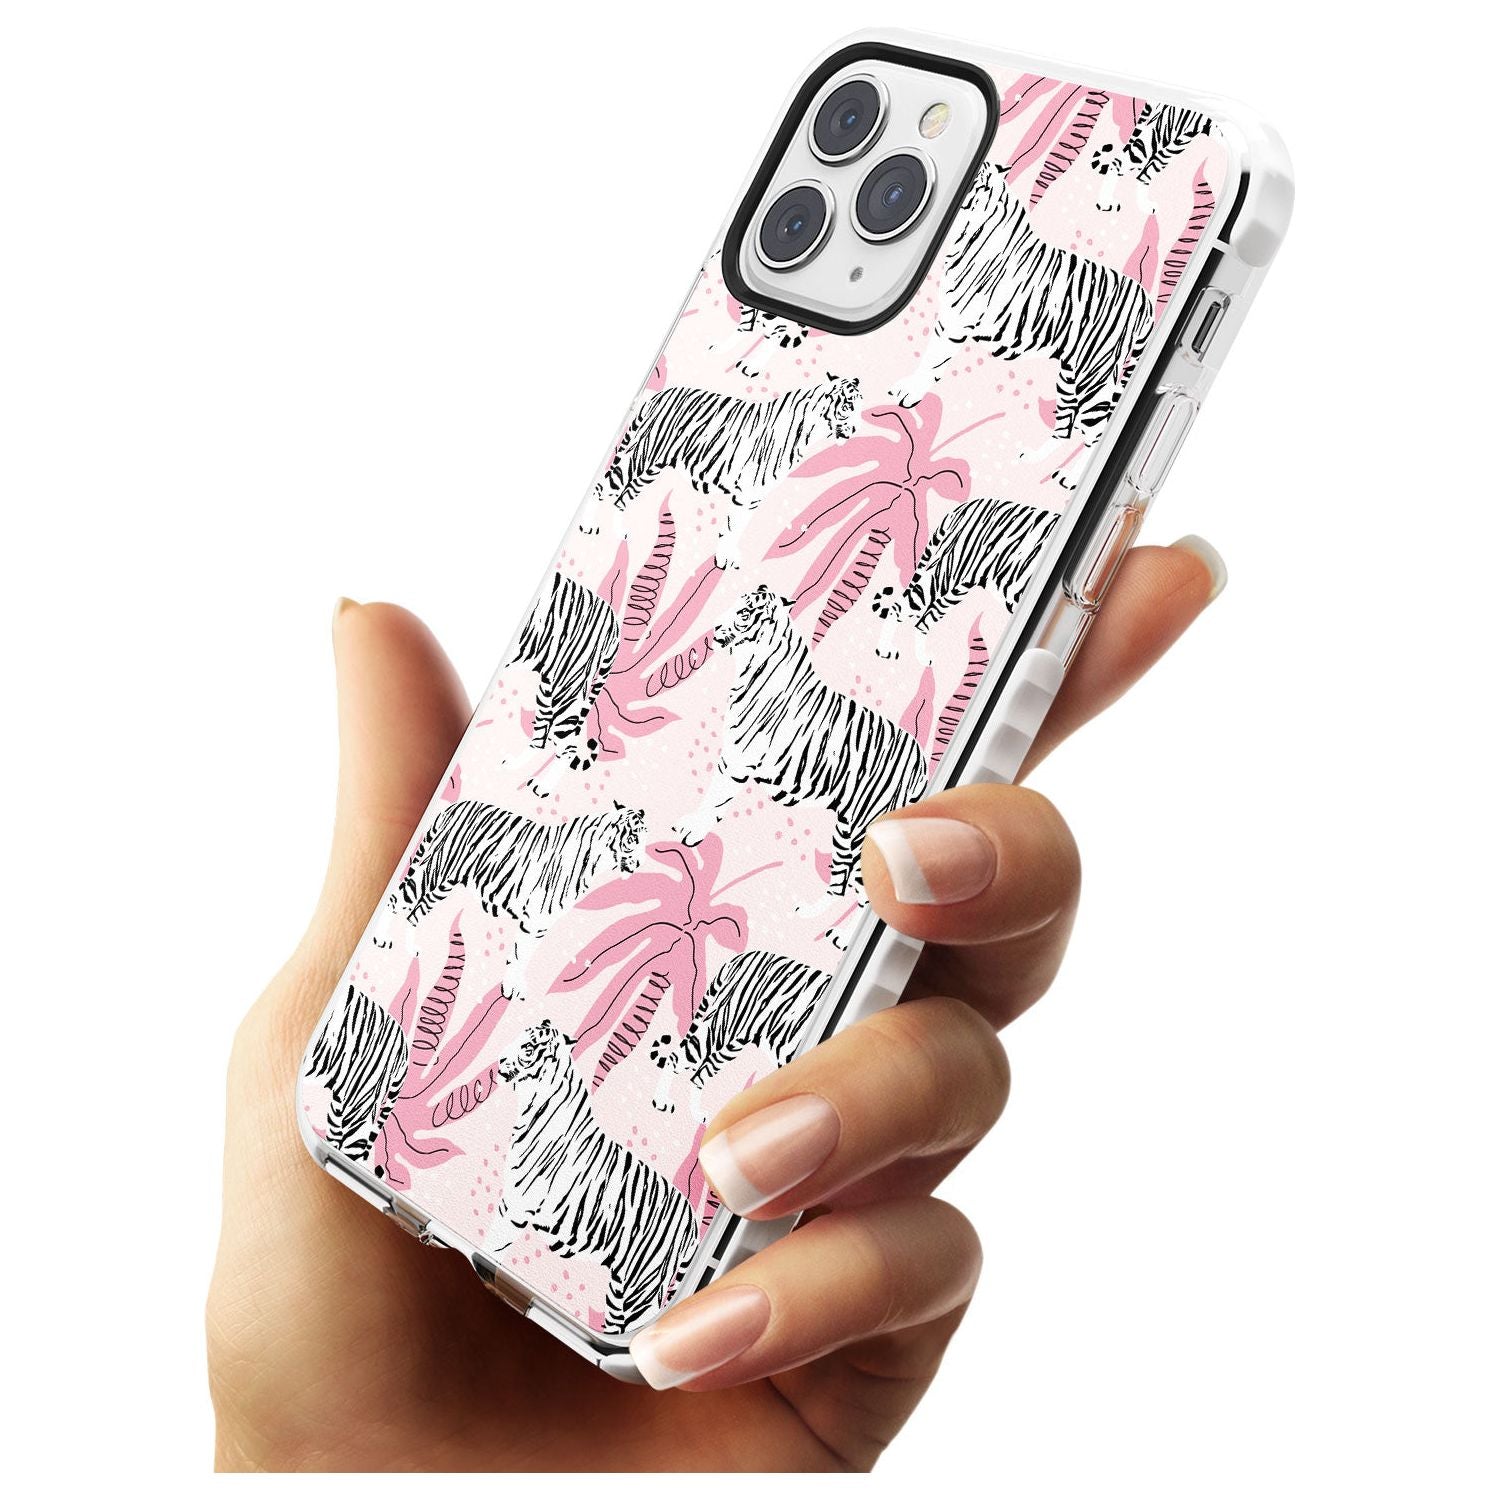 White Tigers on Pink Pattern Impact Phone Case for iPhone 11 Pro Max